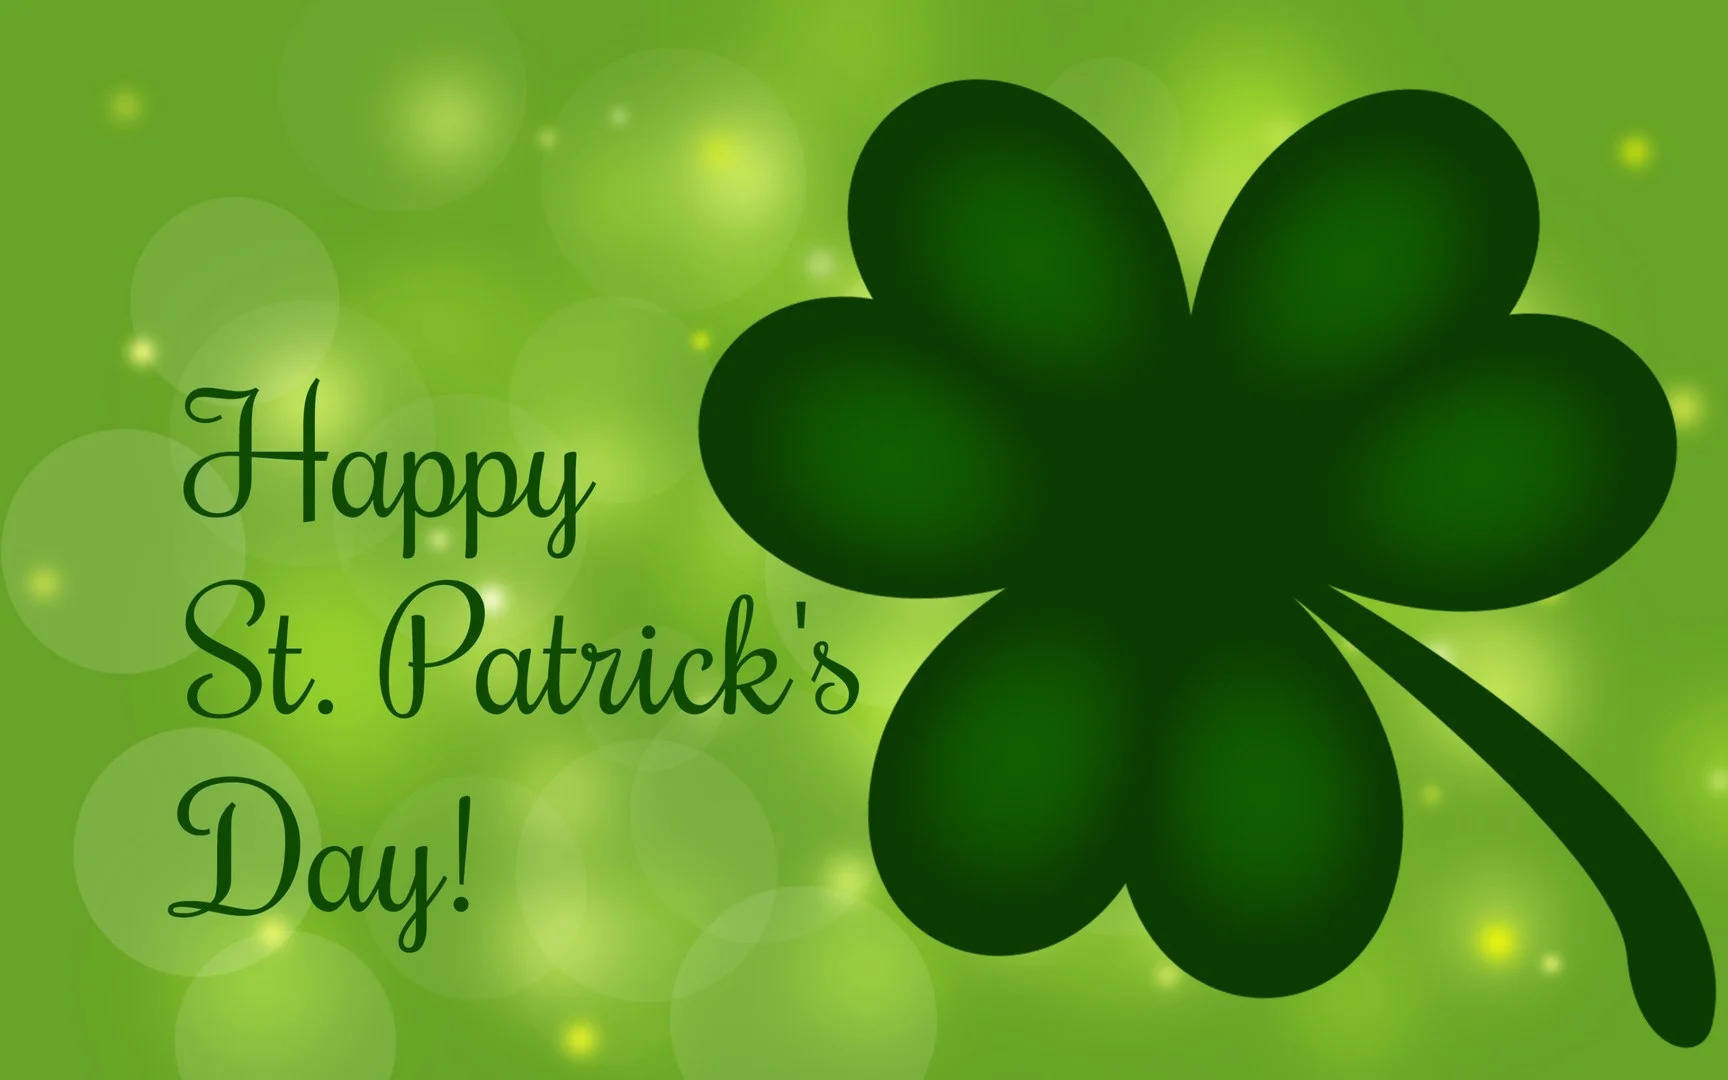 Saint Patrick’s Day With Big Green Clover Wallpaper